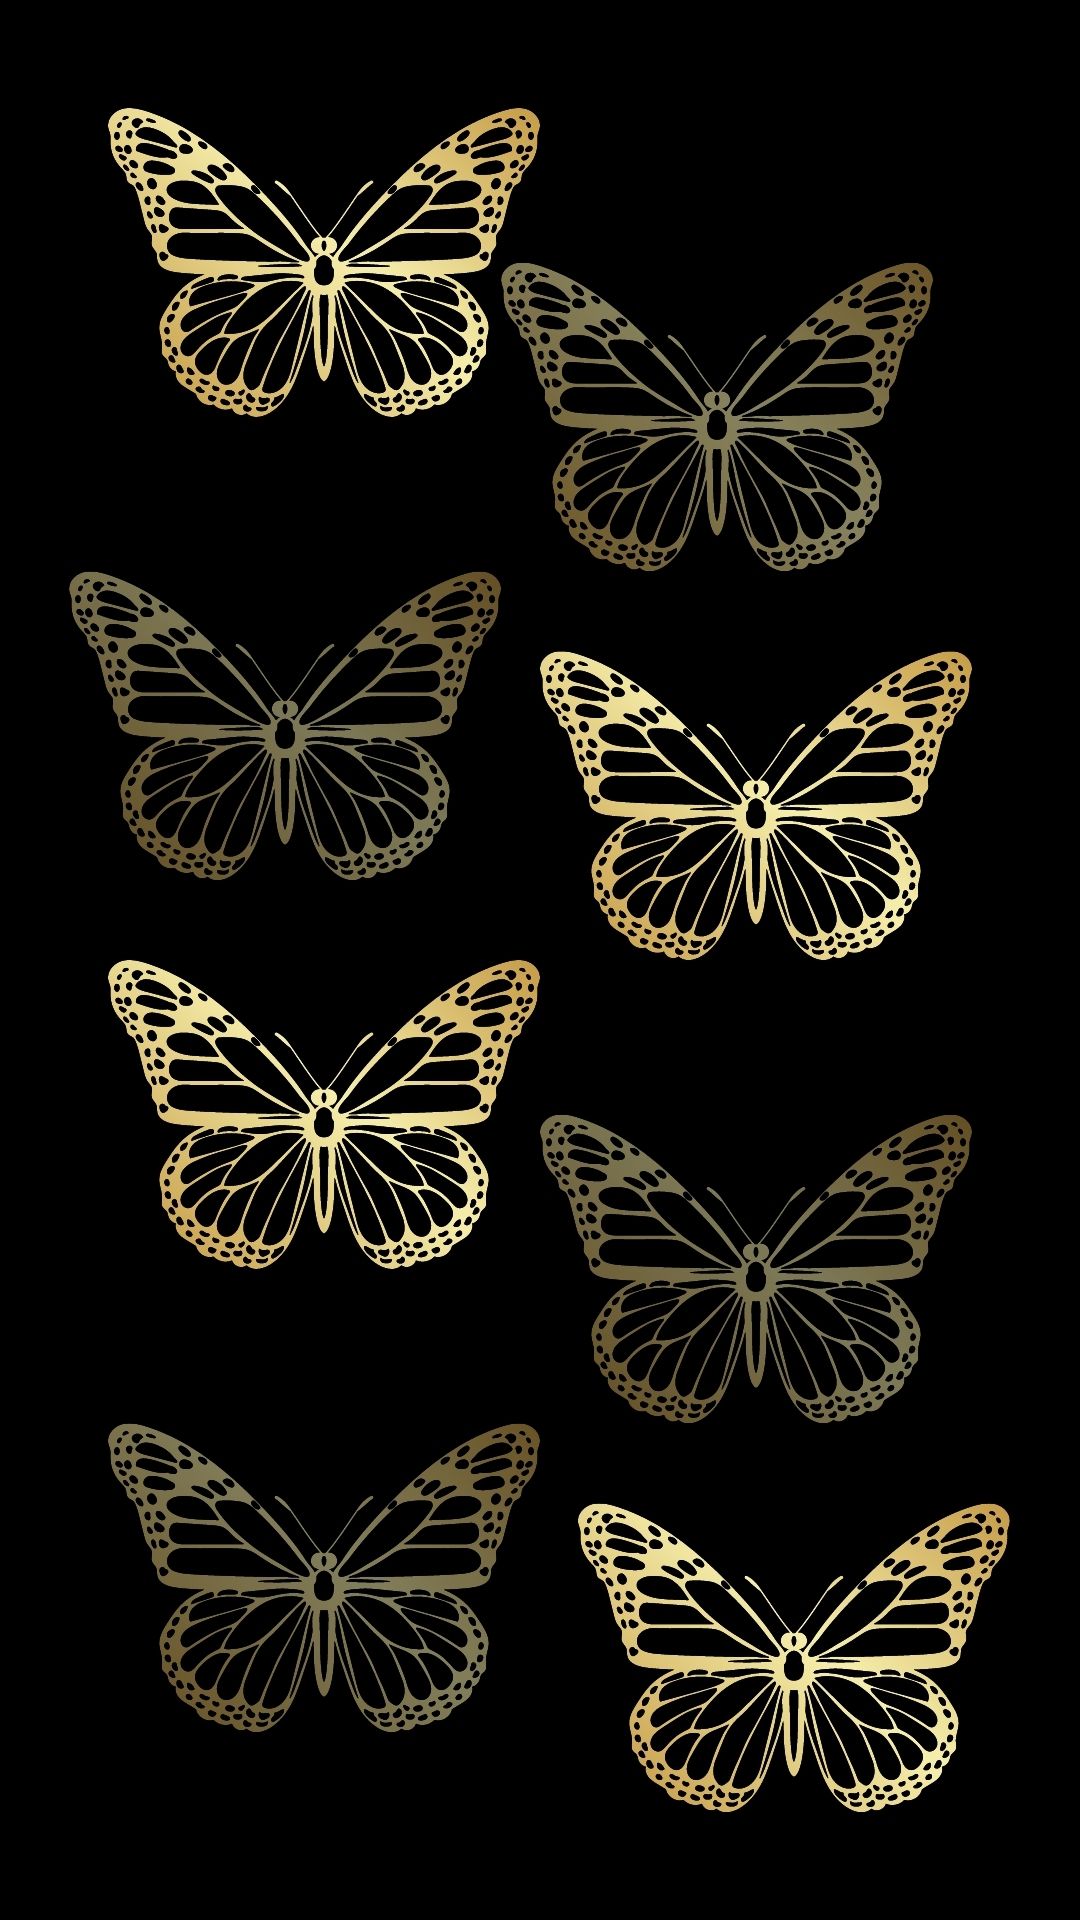 Gold And Black Wallpaper  Designs For Phone